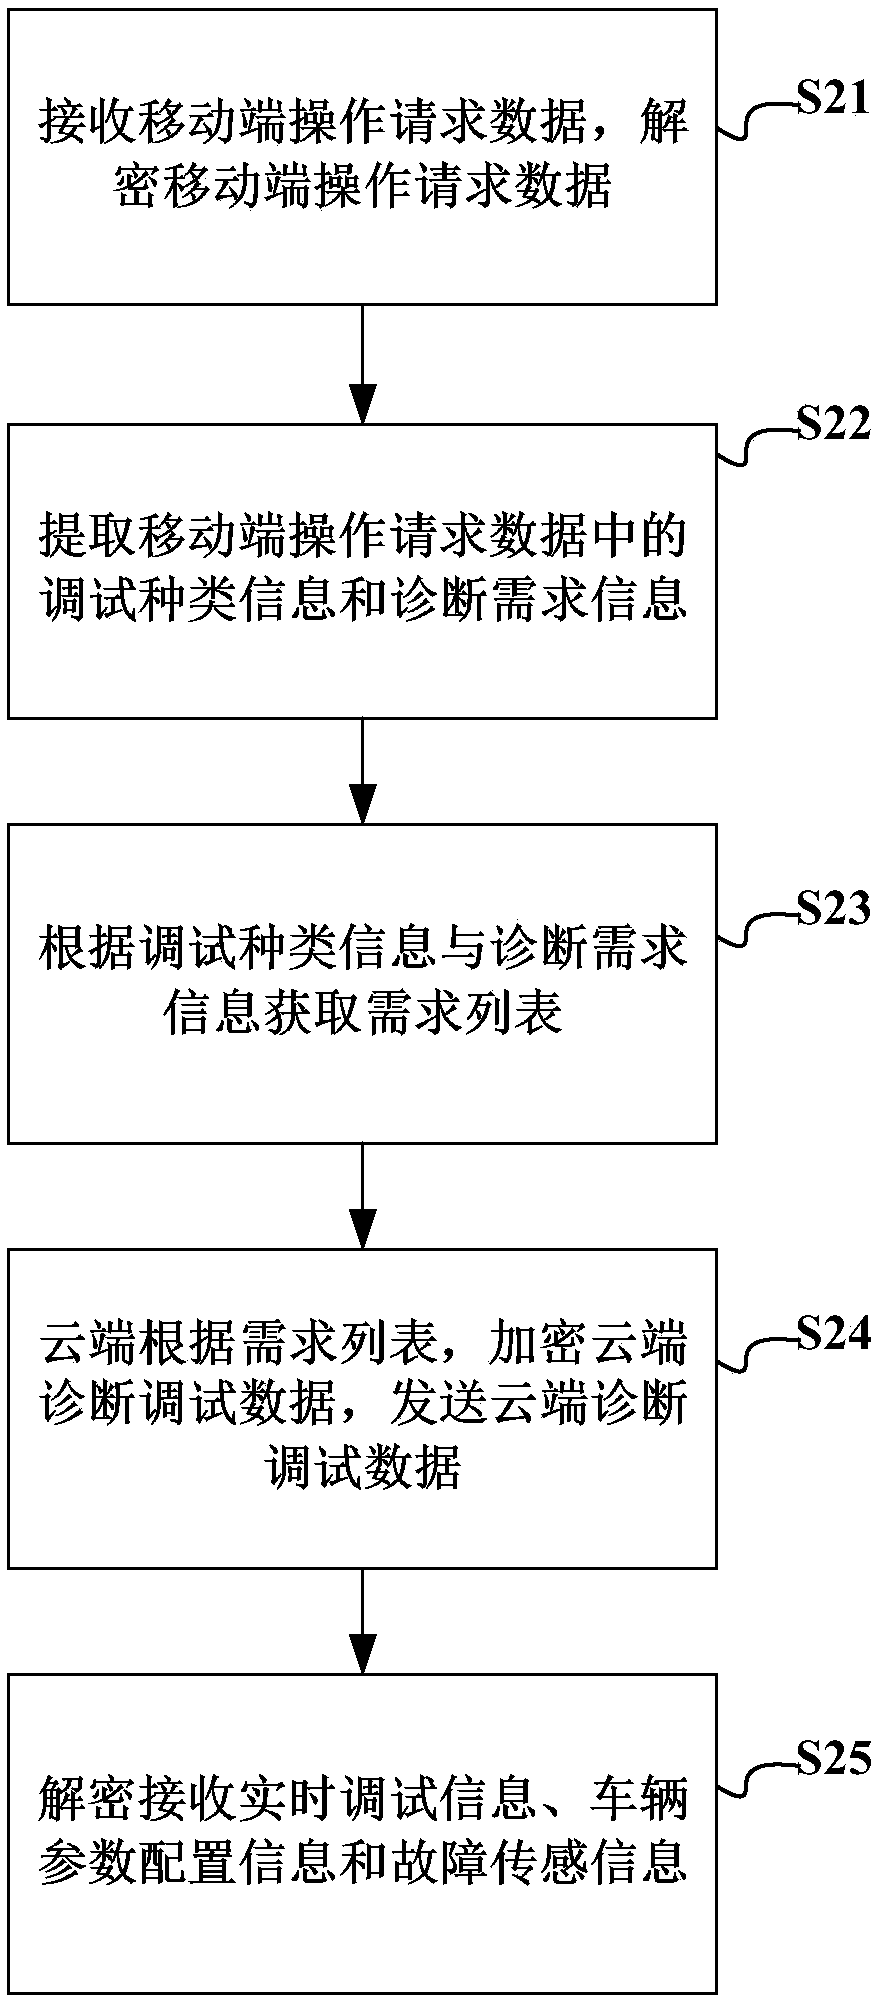 Cloud terminal-based vehicle remote diagnosis method, server end, vehicle end and client end